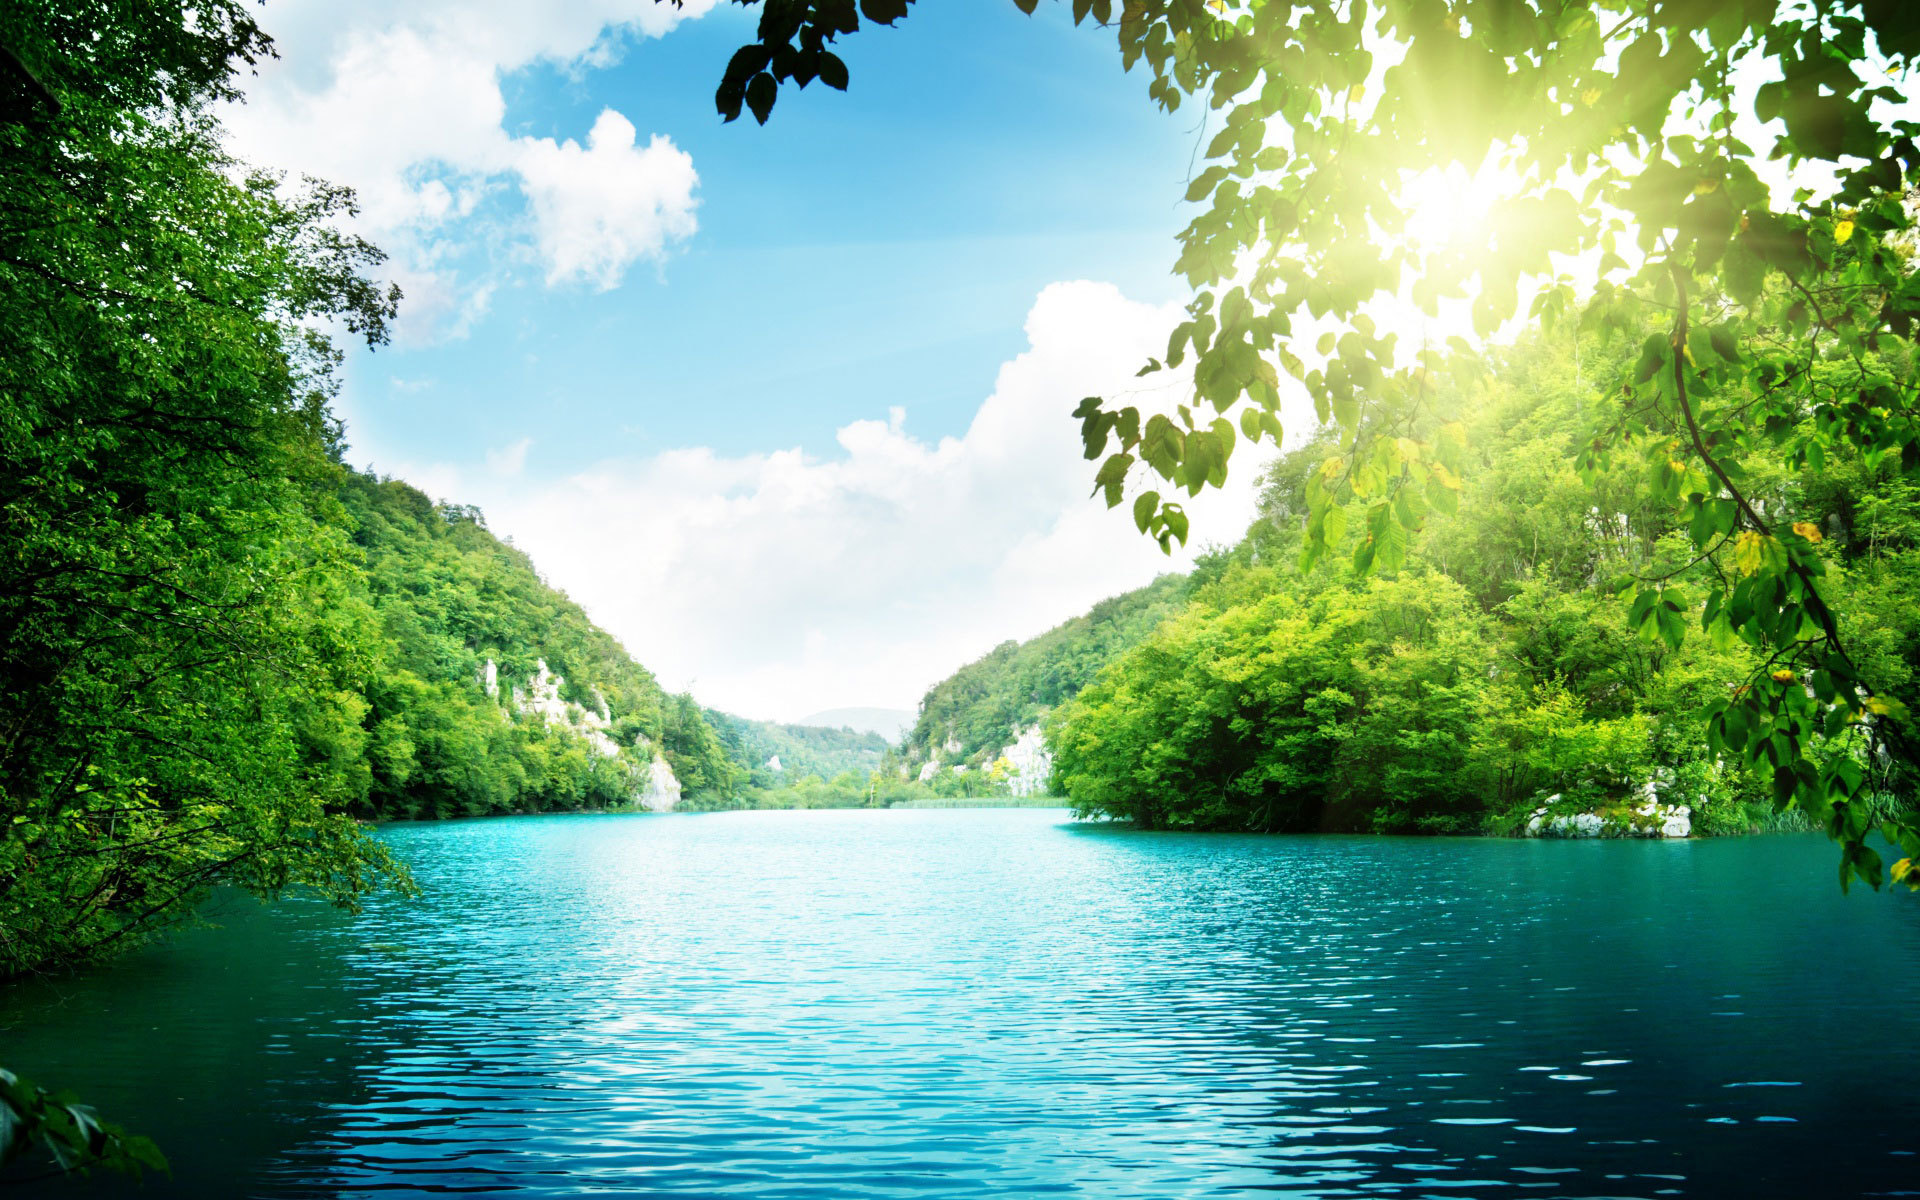 Lake Of The Mountains In Summer Wallpaper And Image